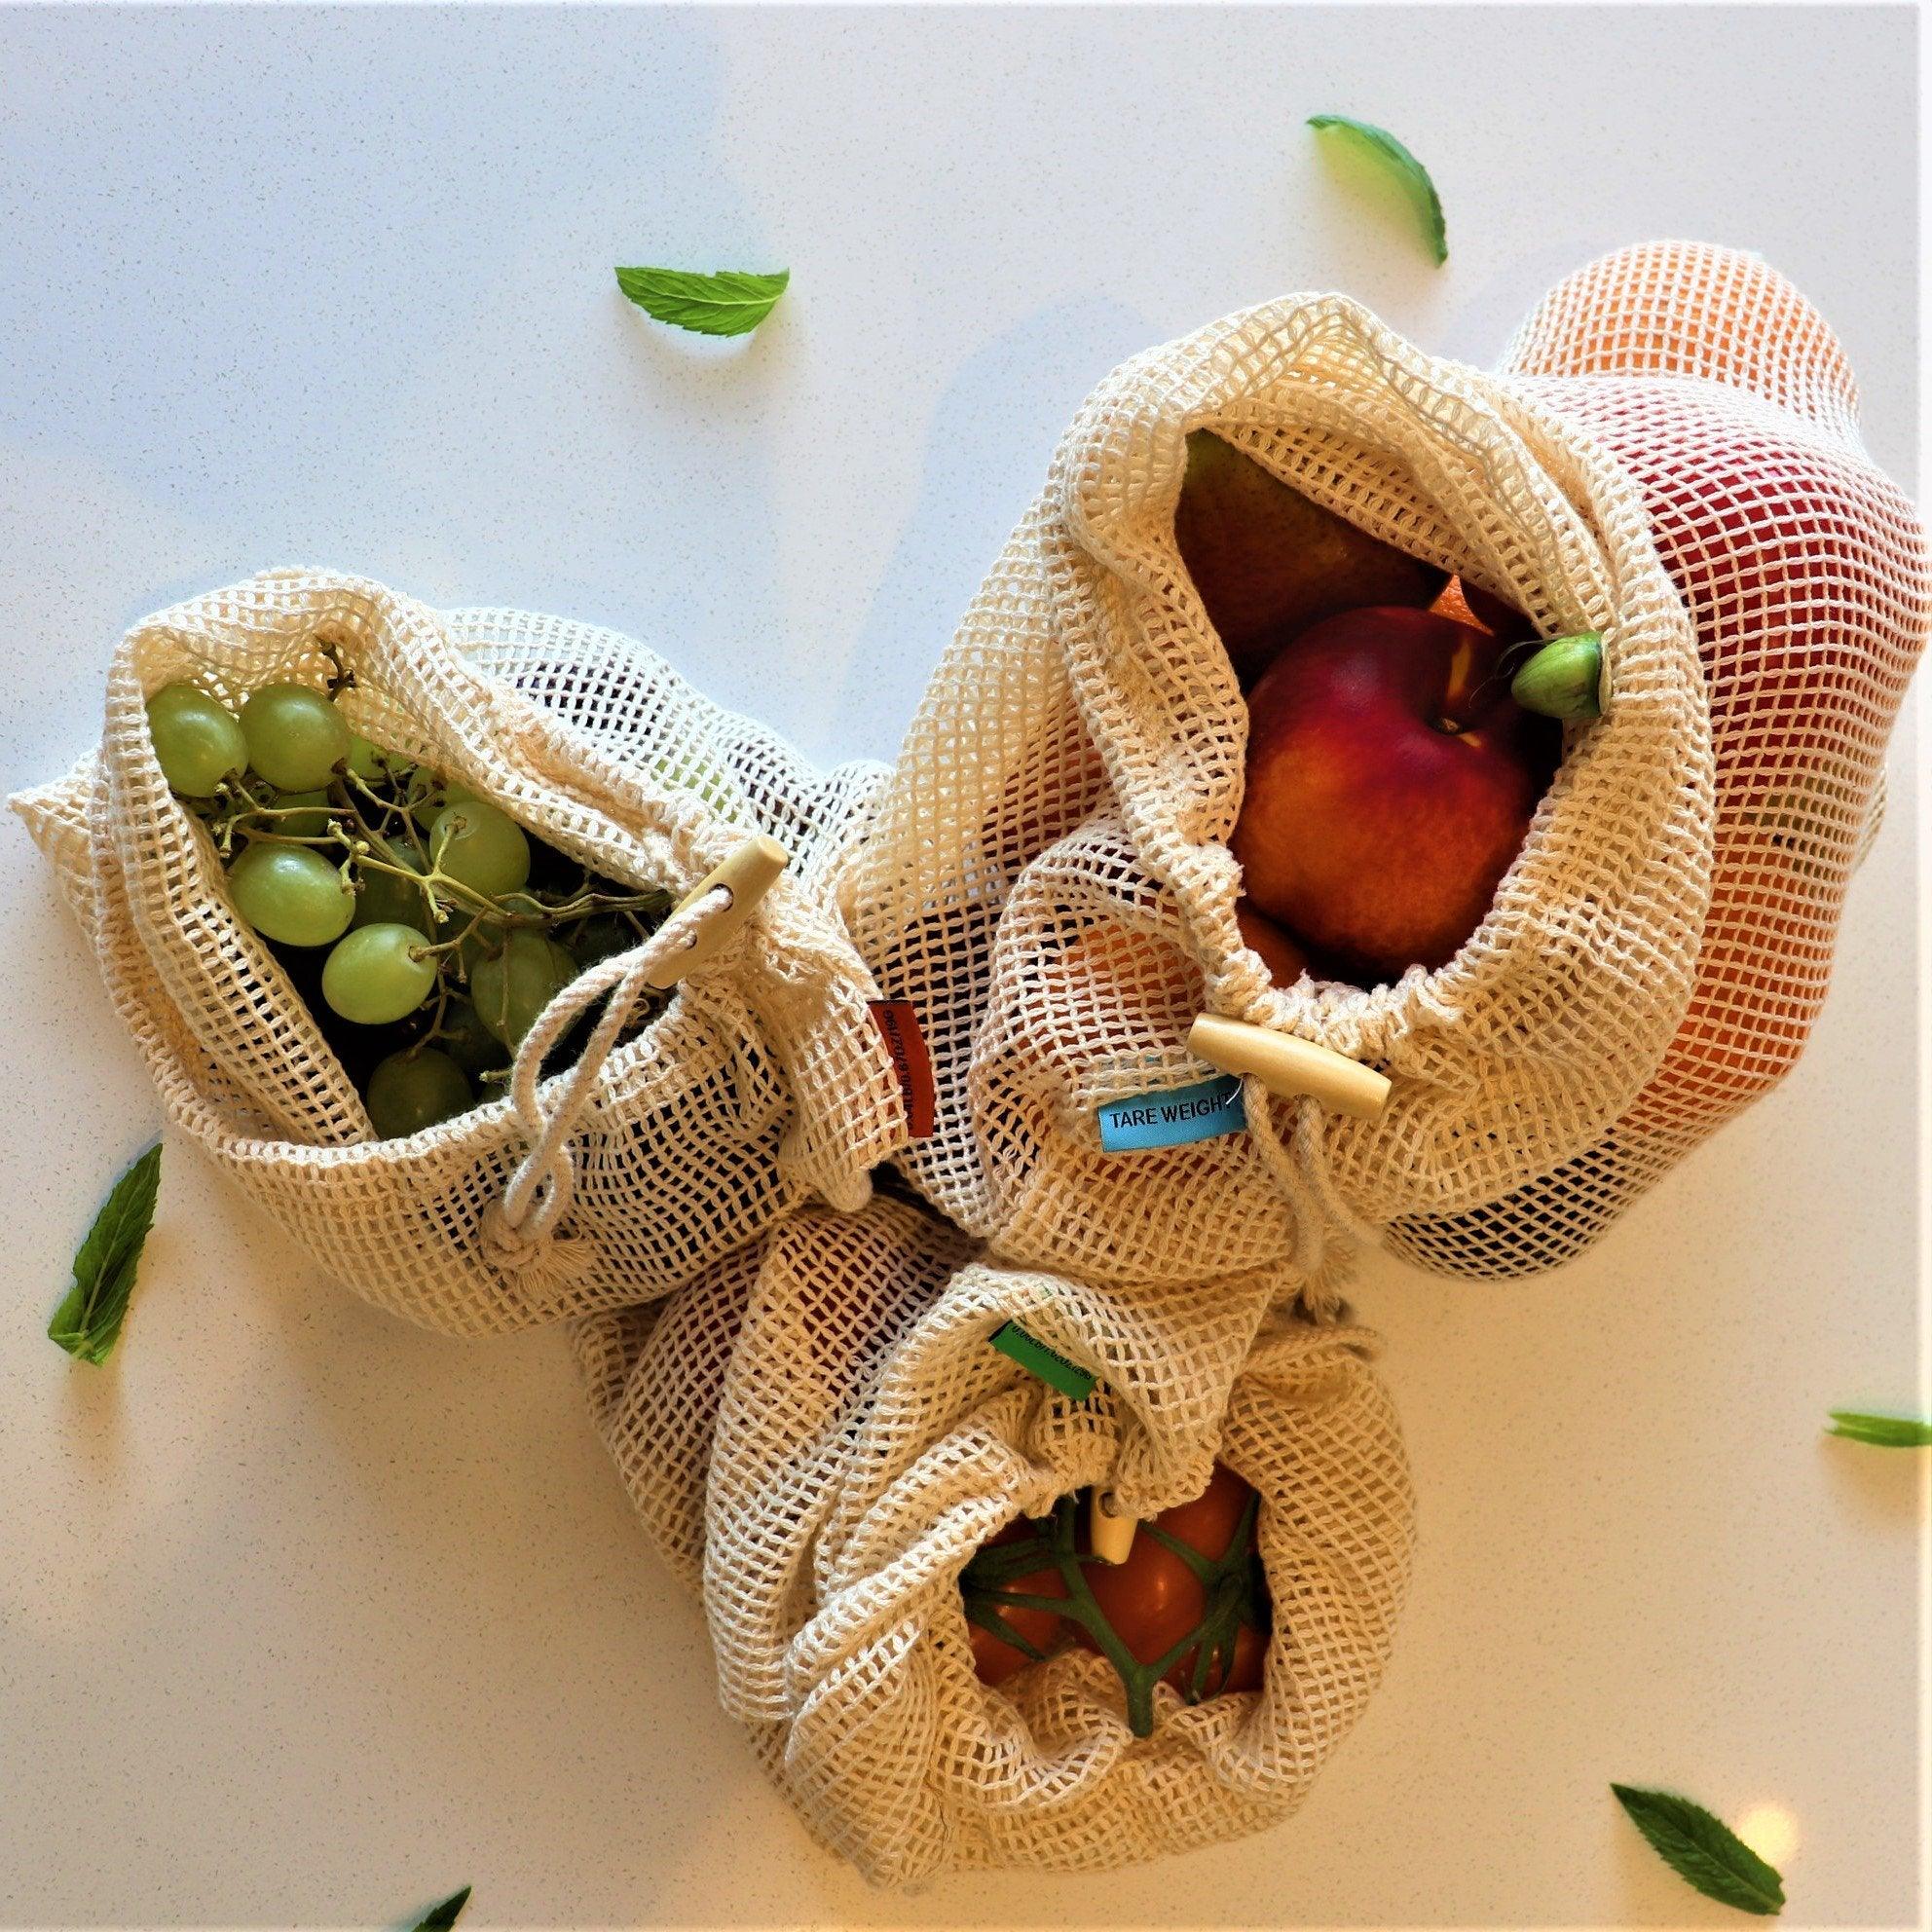 100% Organic Cotton Open Weave Reusable Vegetable Bag - Set of 3Sustainable Kitchen - Us and the Earth